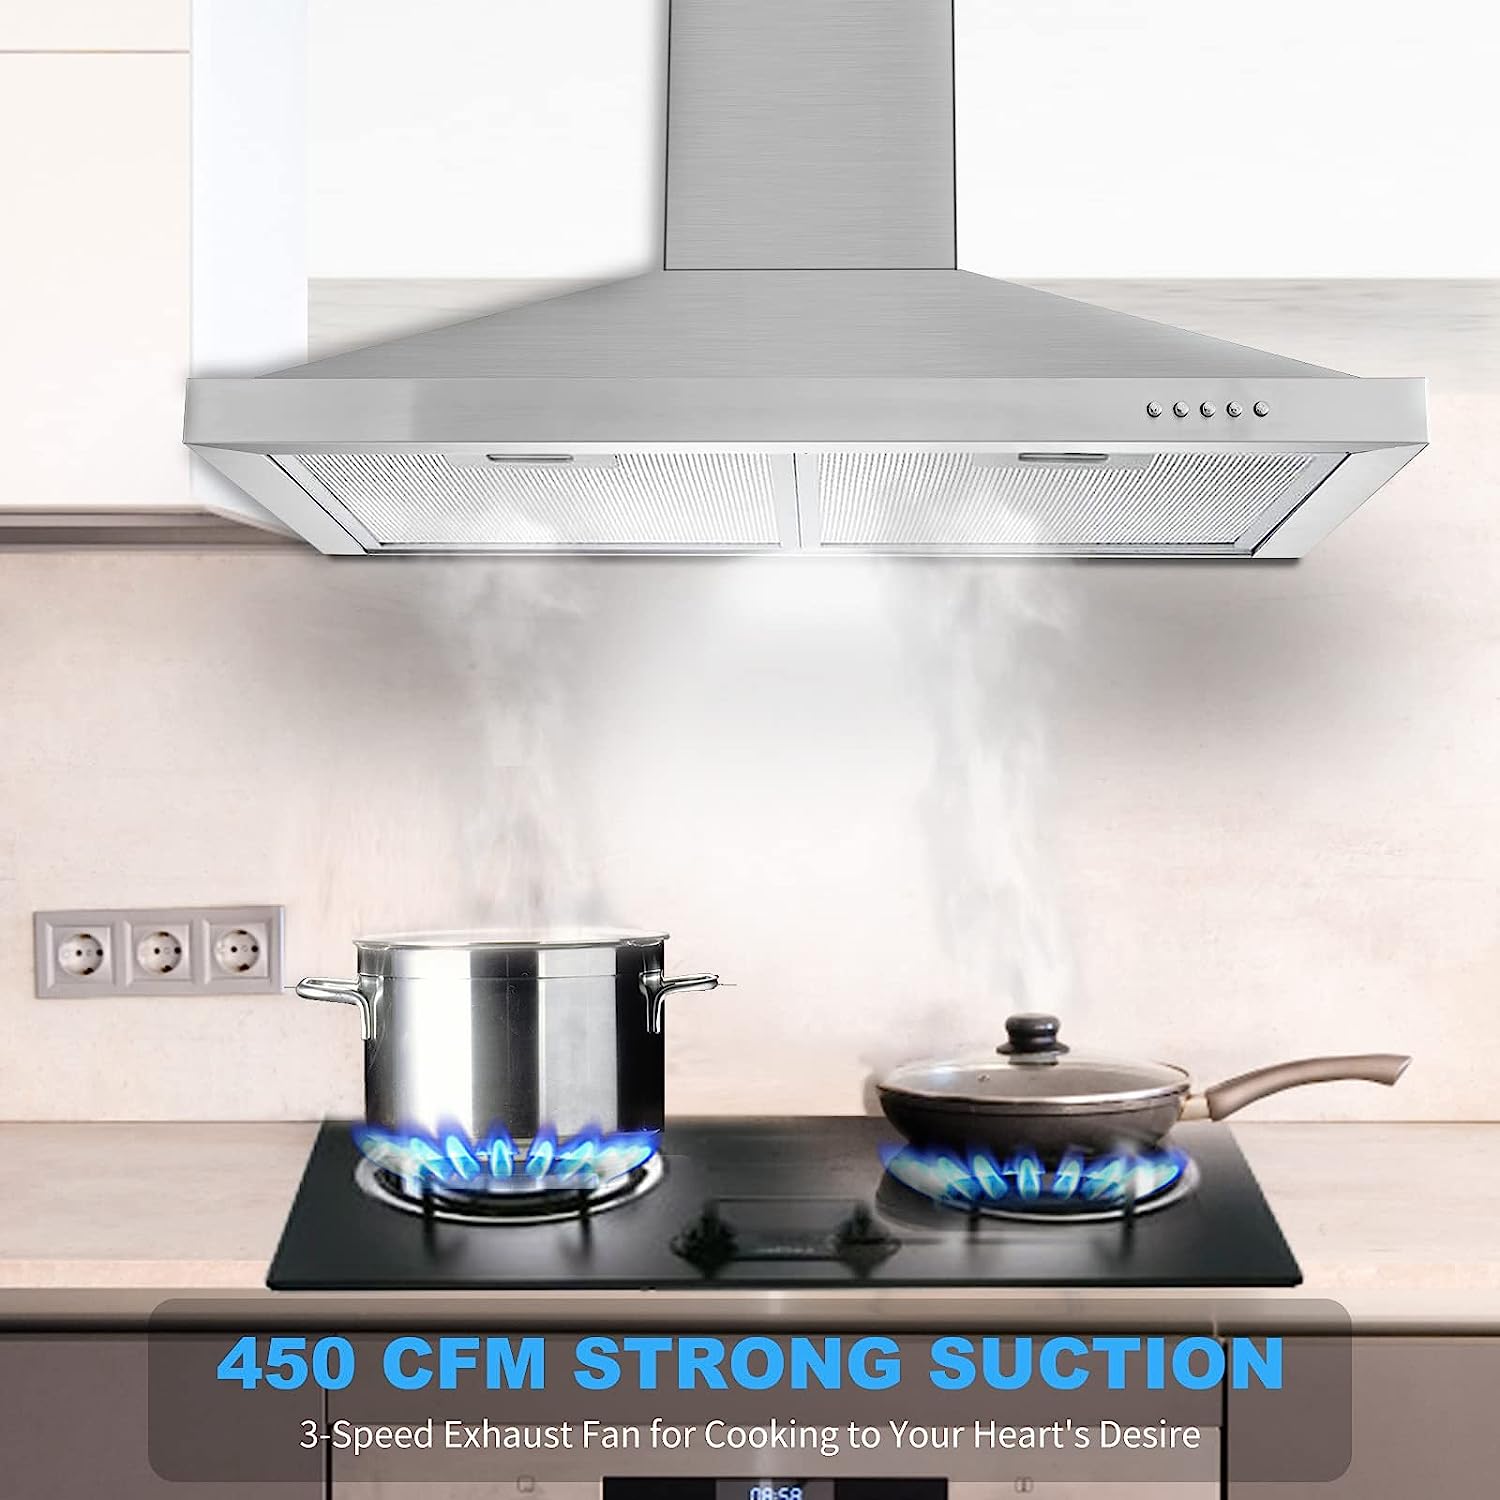 24 inch Range Hood Wall Mount Vent Hood in Stainless Steel W Convertible Duct